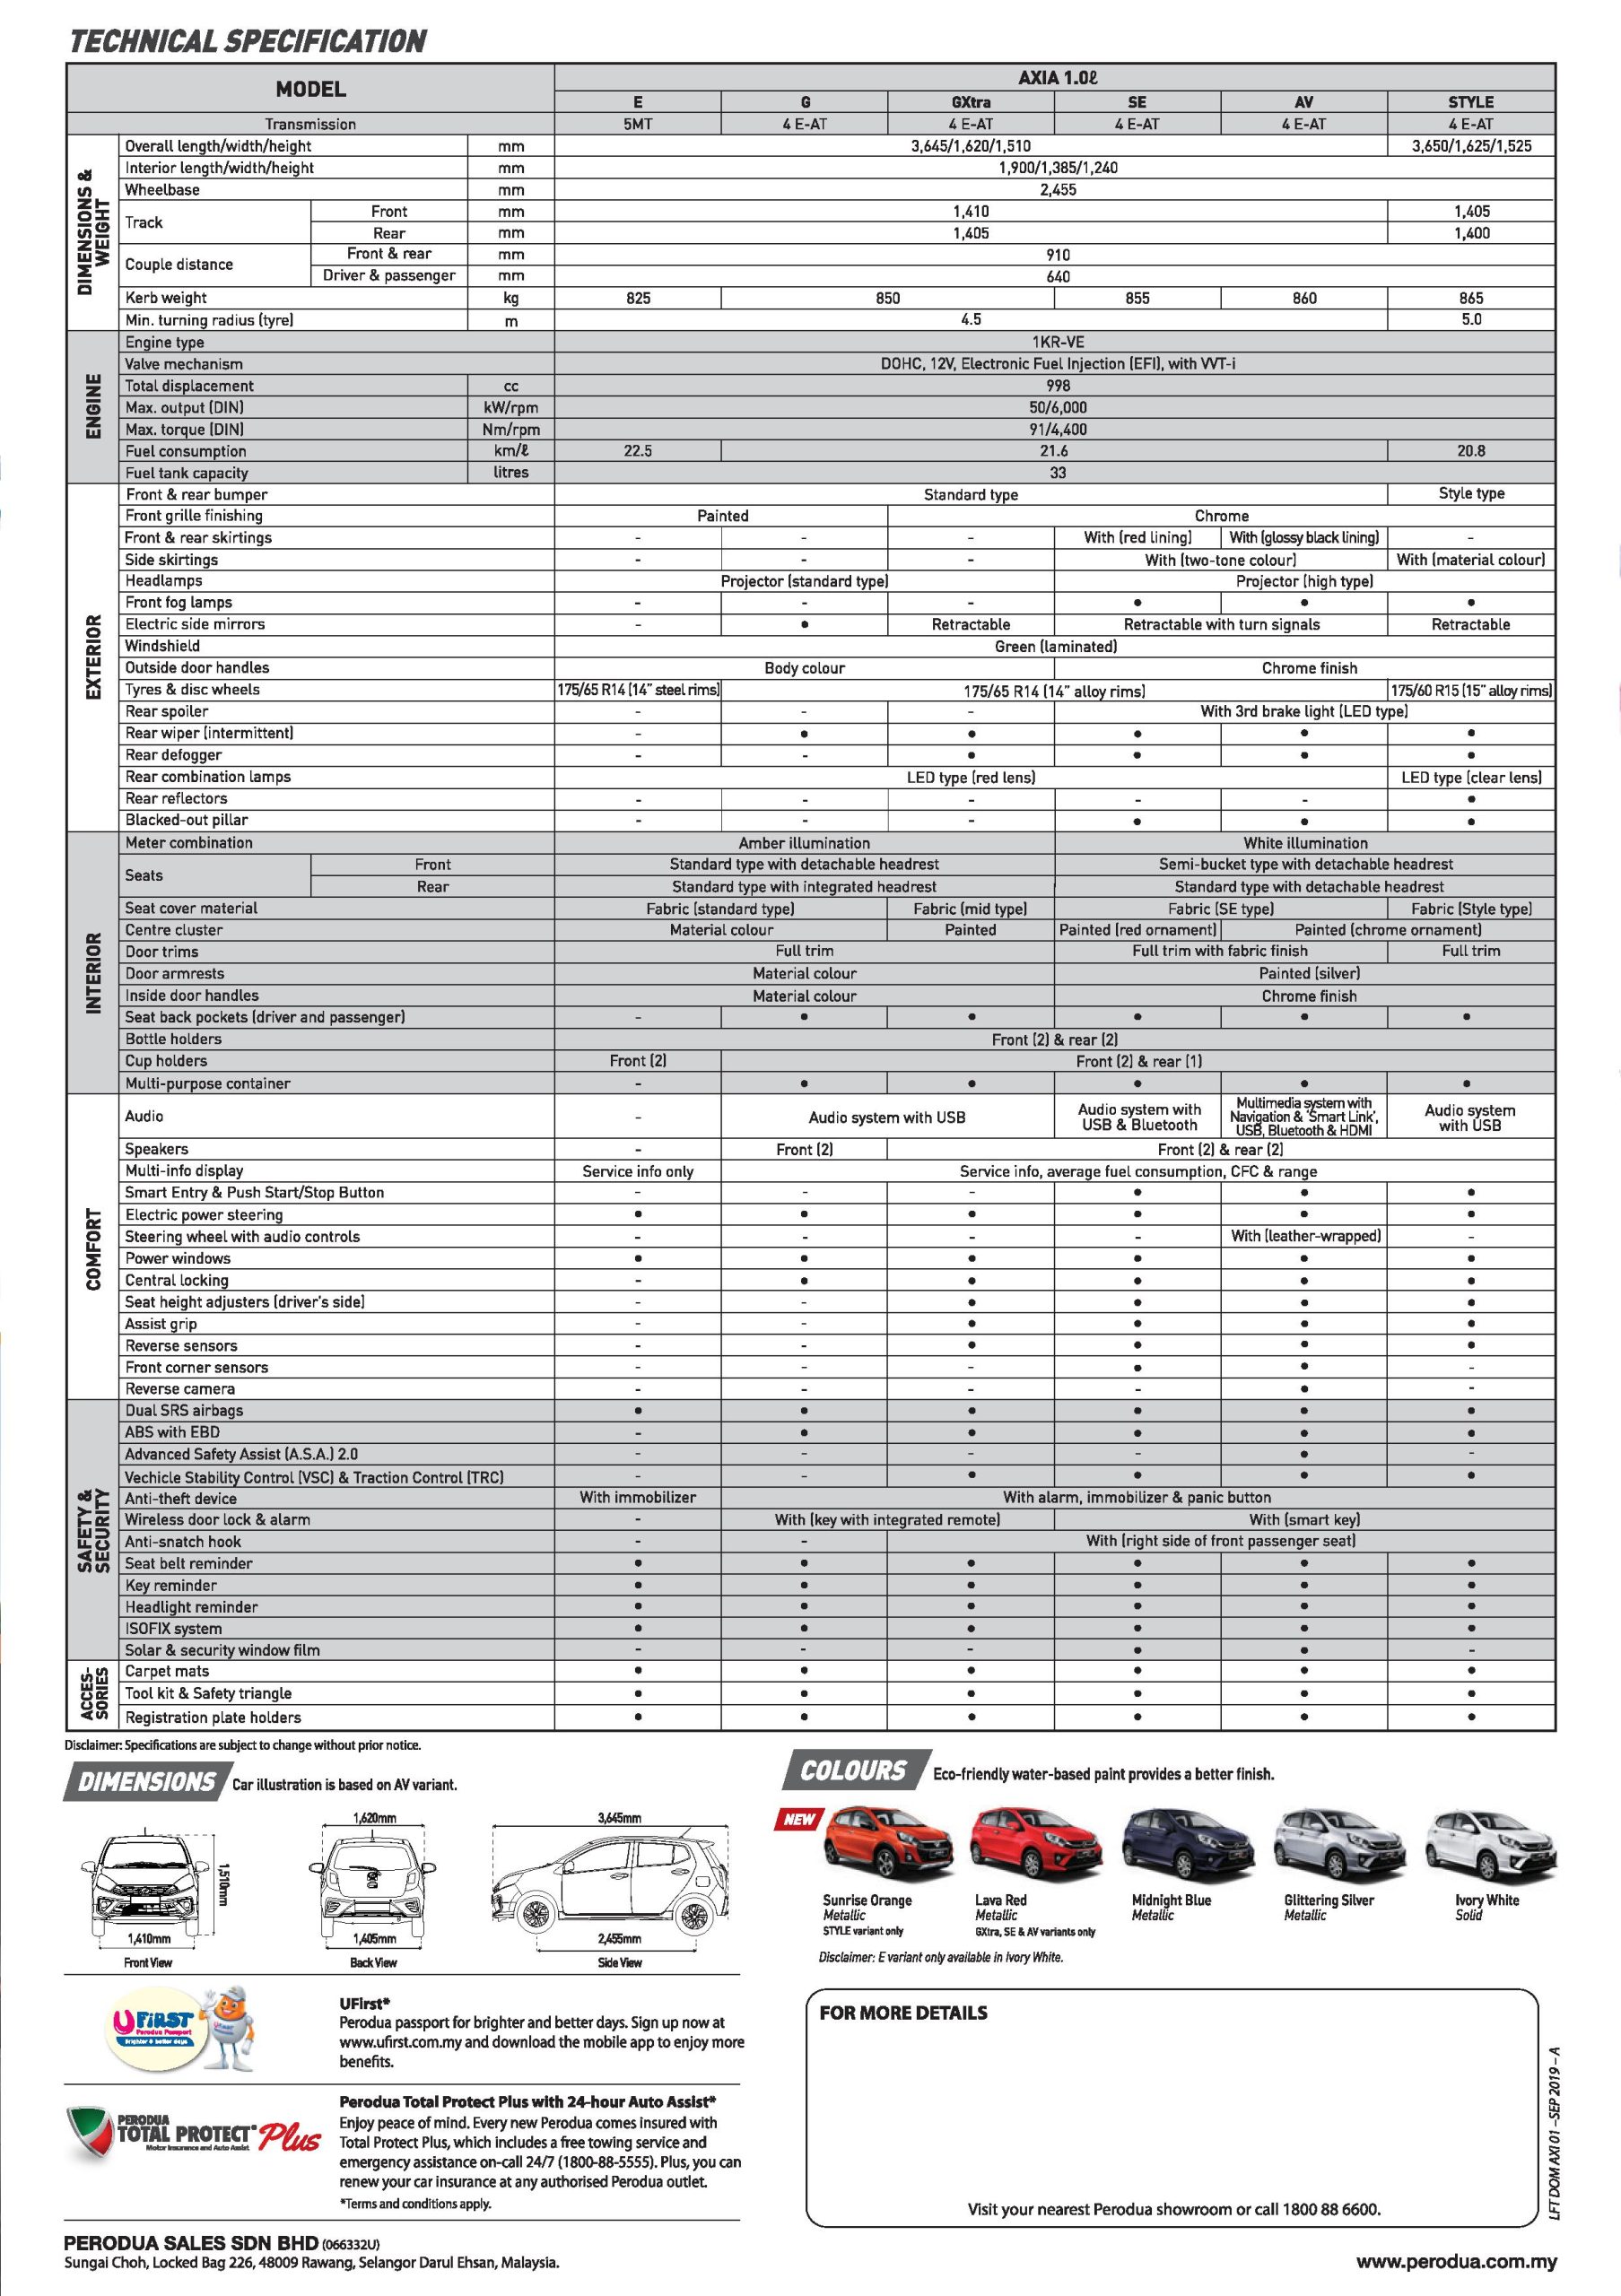 specification axia